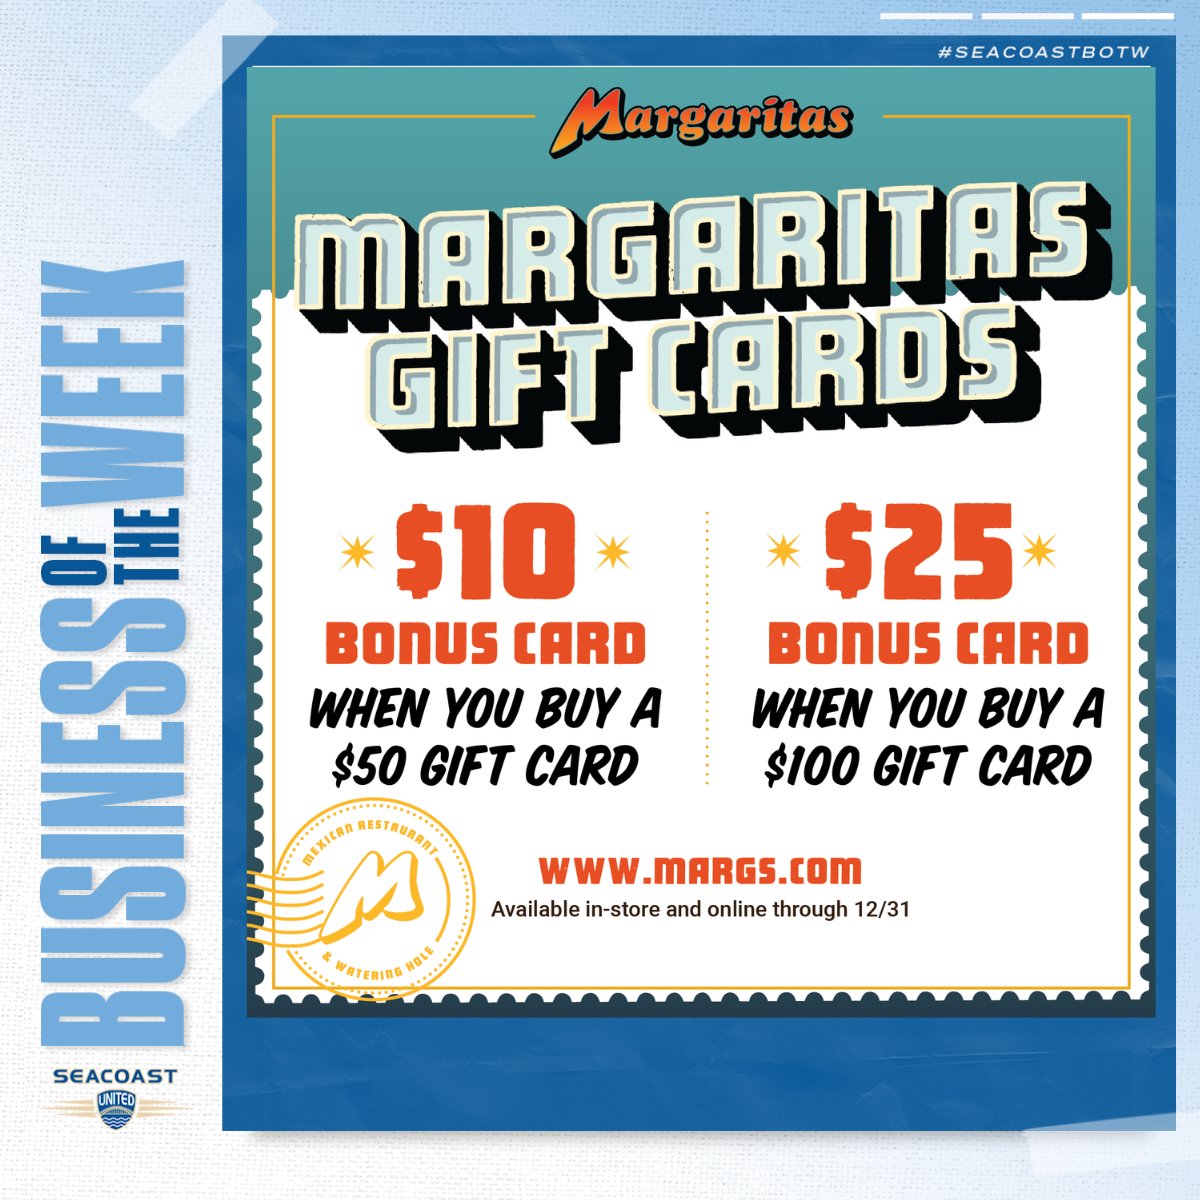 Do you need any last minute gifts? Give the gift of Margaritas @margsmex ! This holiday season, earn a $10 bonus card when you buy $50 or more in gift cards & a $25 bonus card when you buy $100 in gift cards! Visit margs.com/giftcardsto learn more. #SeacoastBOTW #SupportLocal